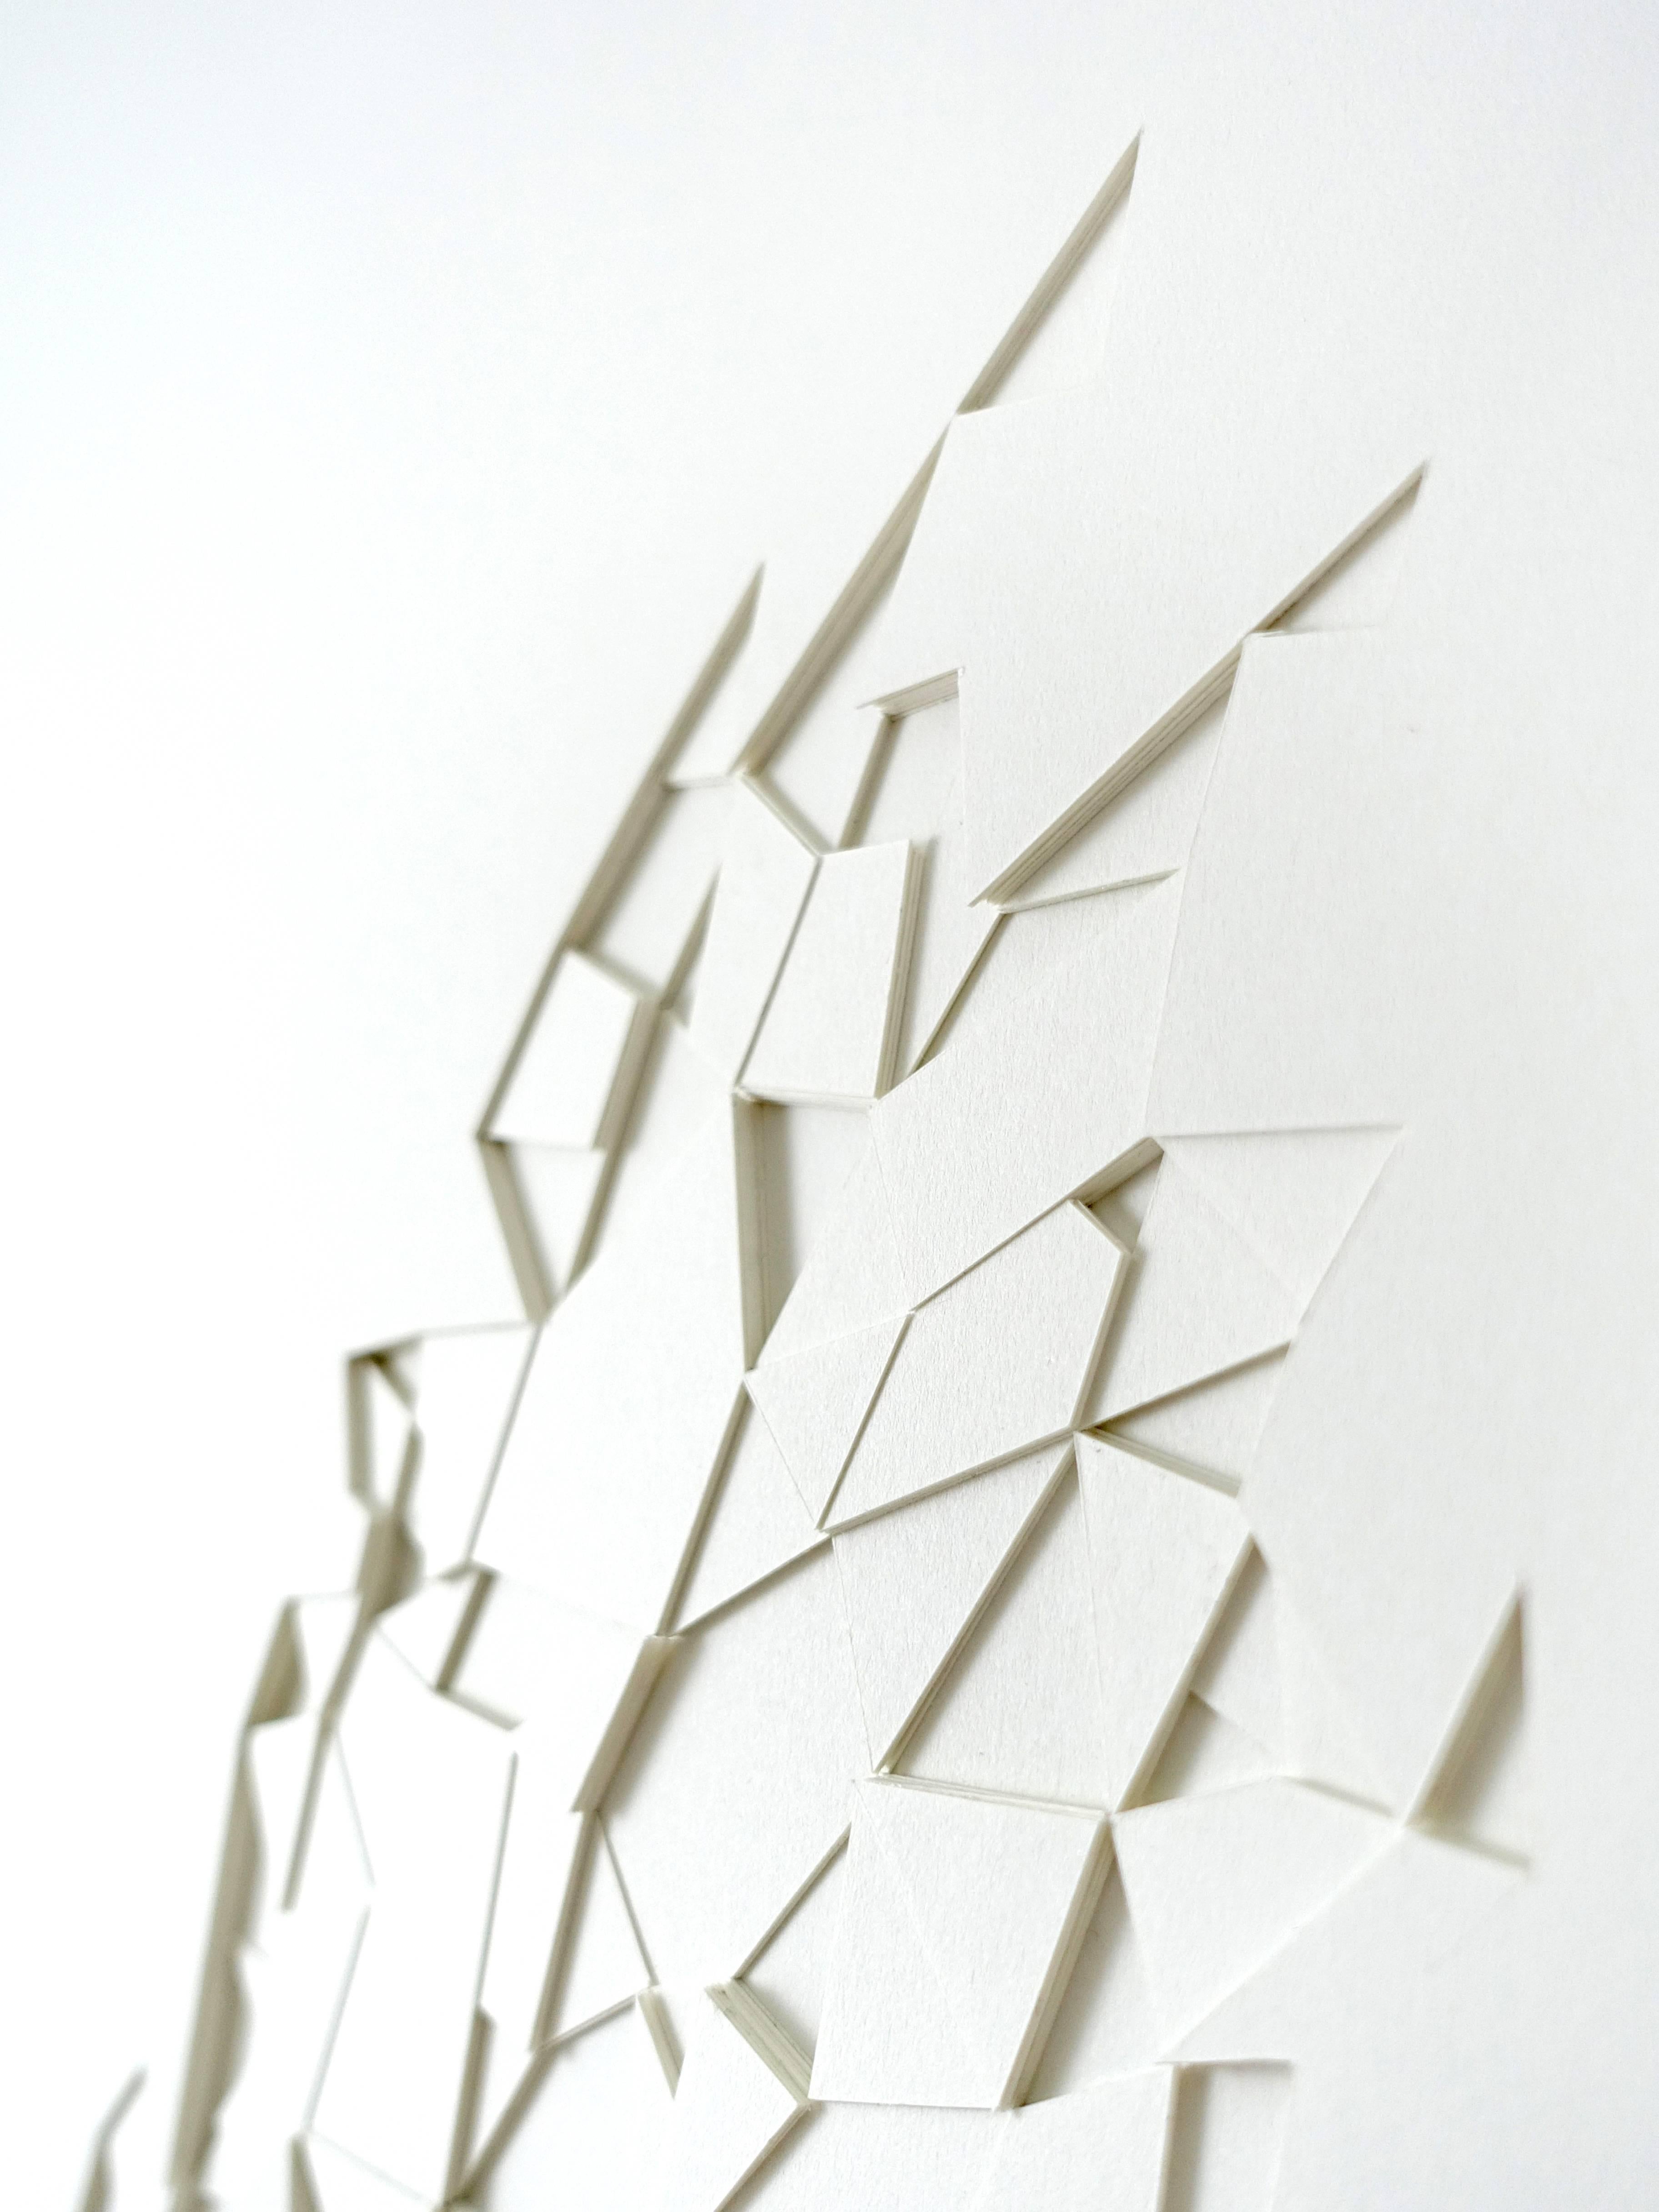 White - abstract textural white geometric hand cut layered paper - Contemporary Art by Huntz Liu